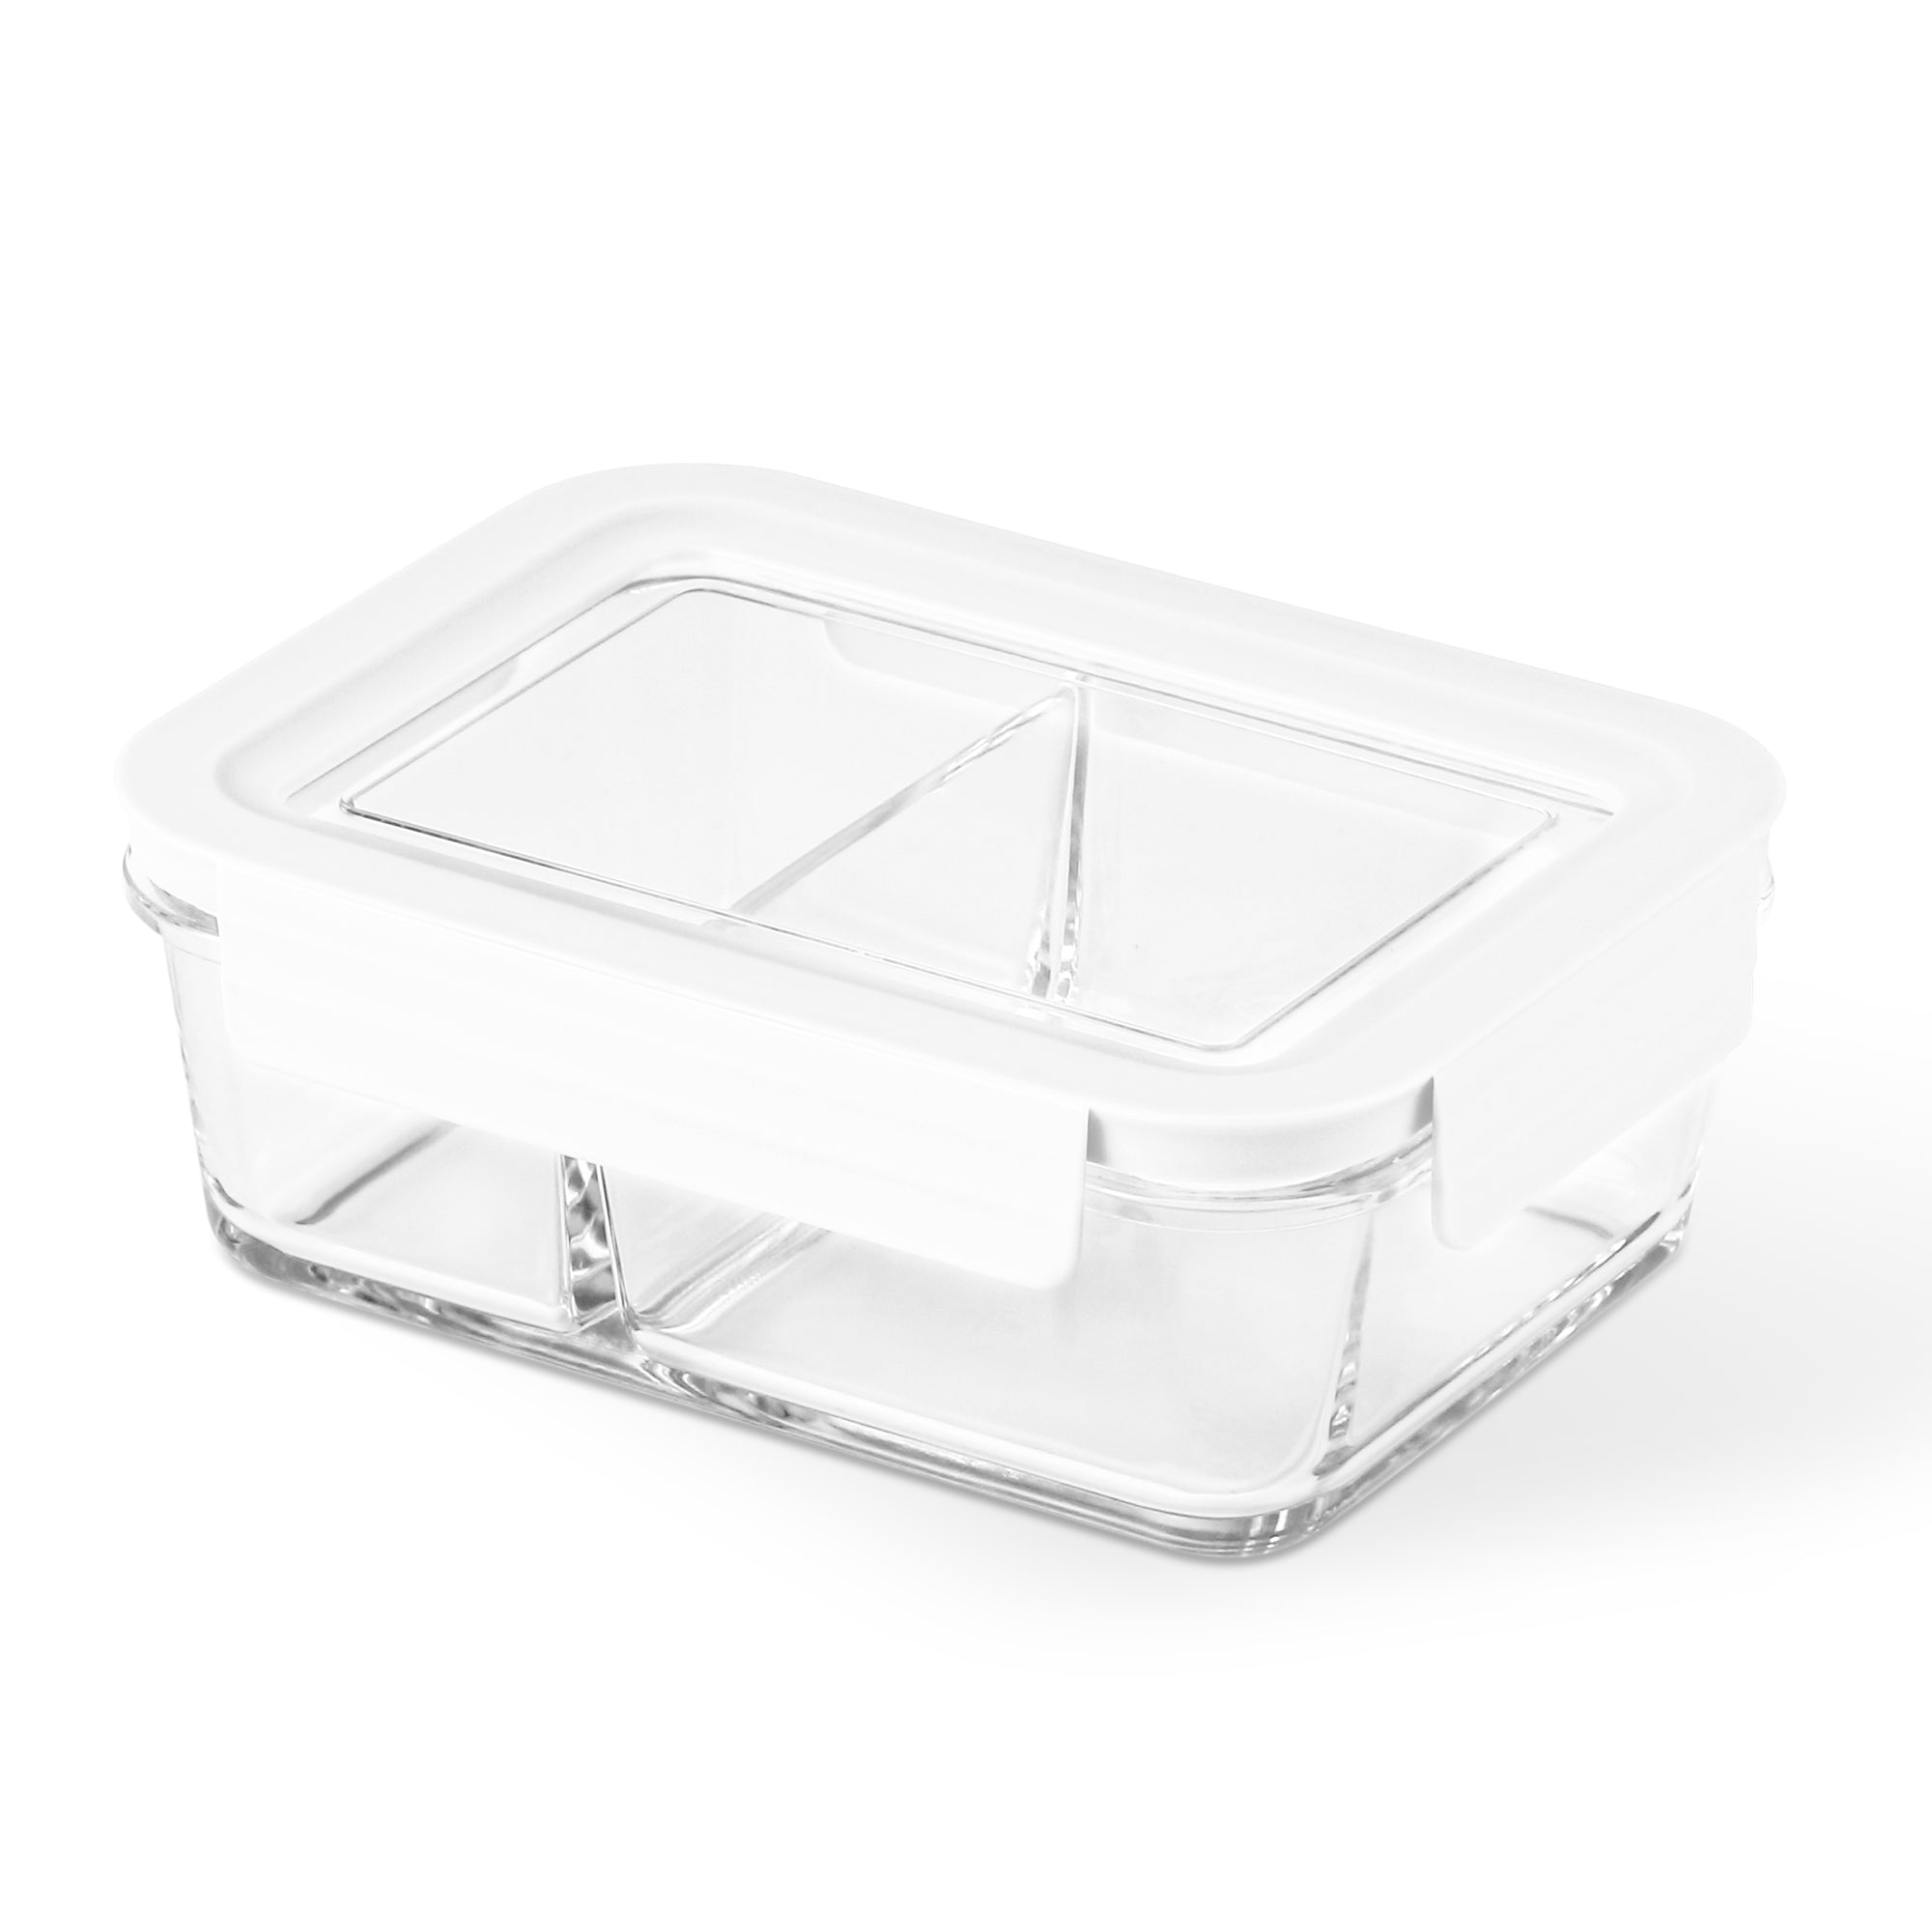 Glass Lunch Box, Glass Meal Prep Containers Glass Food Storage